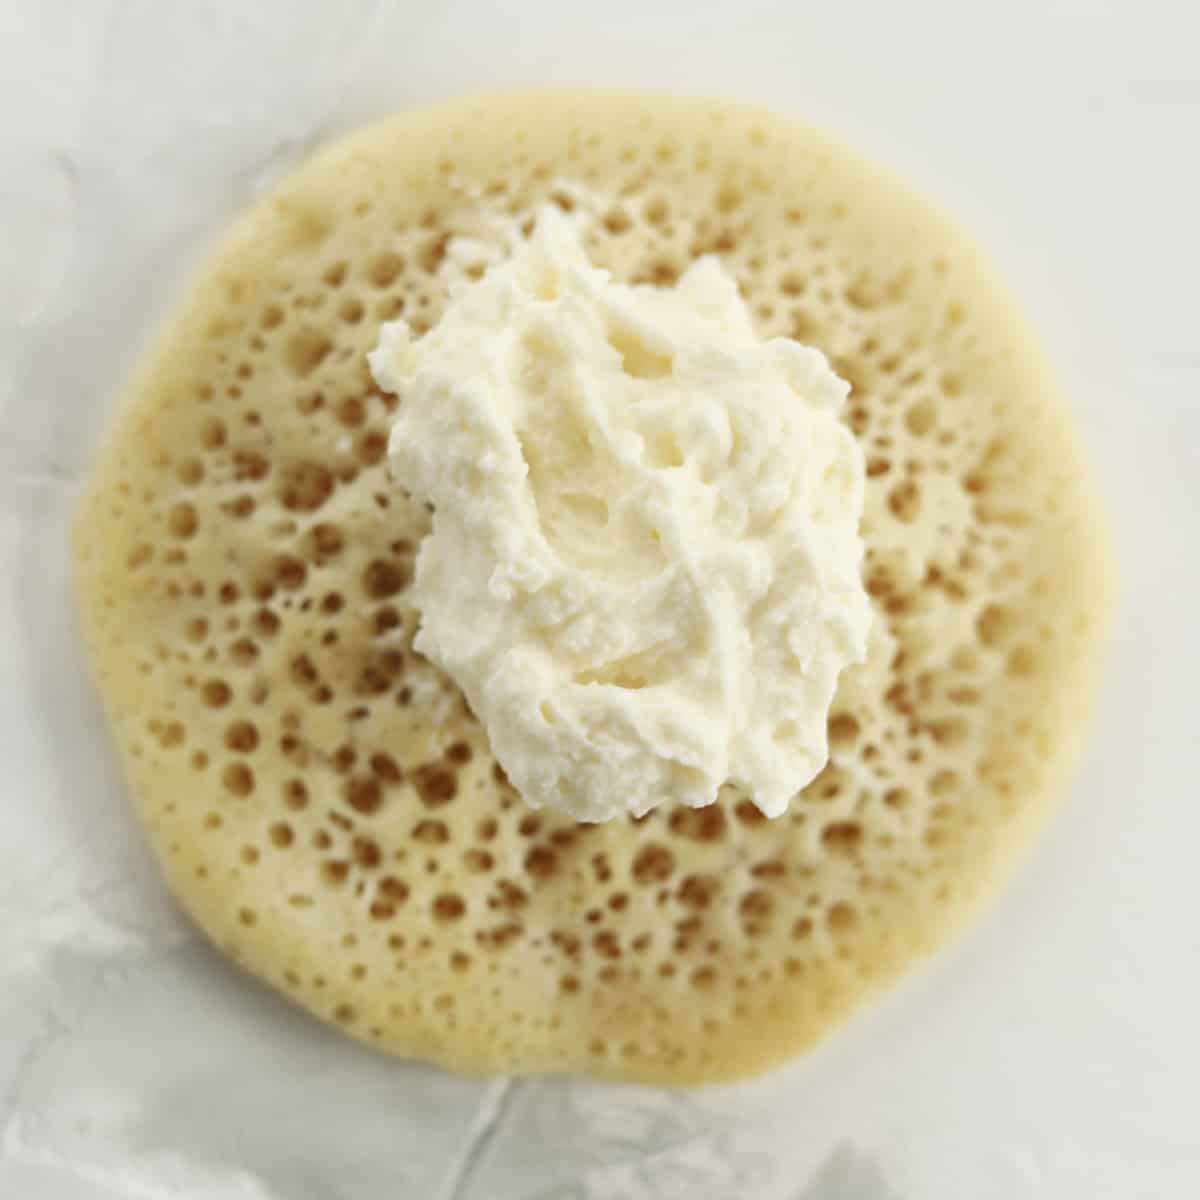 atayef dough with a dollop of cream cheese in the center